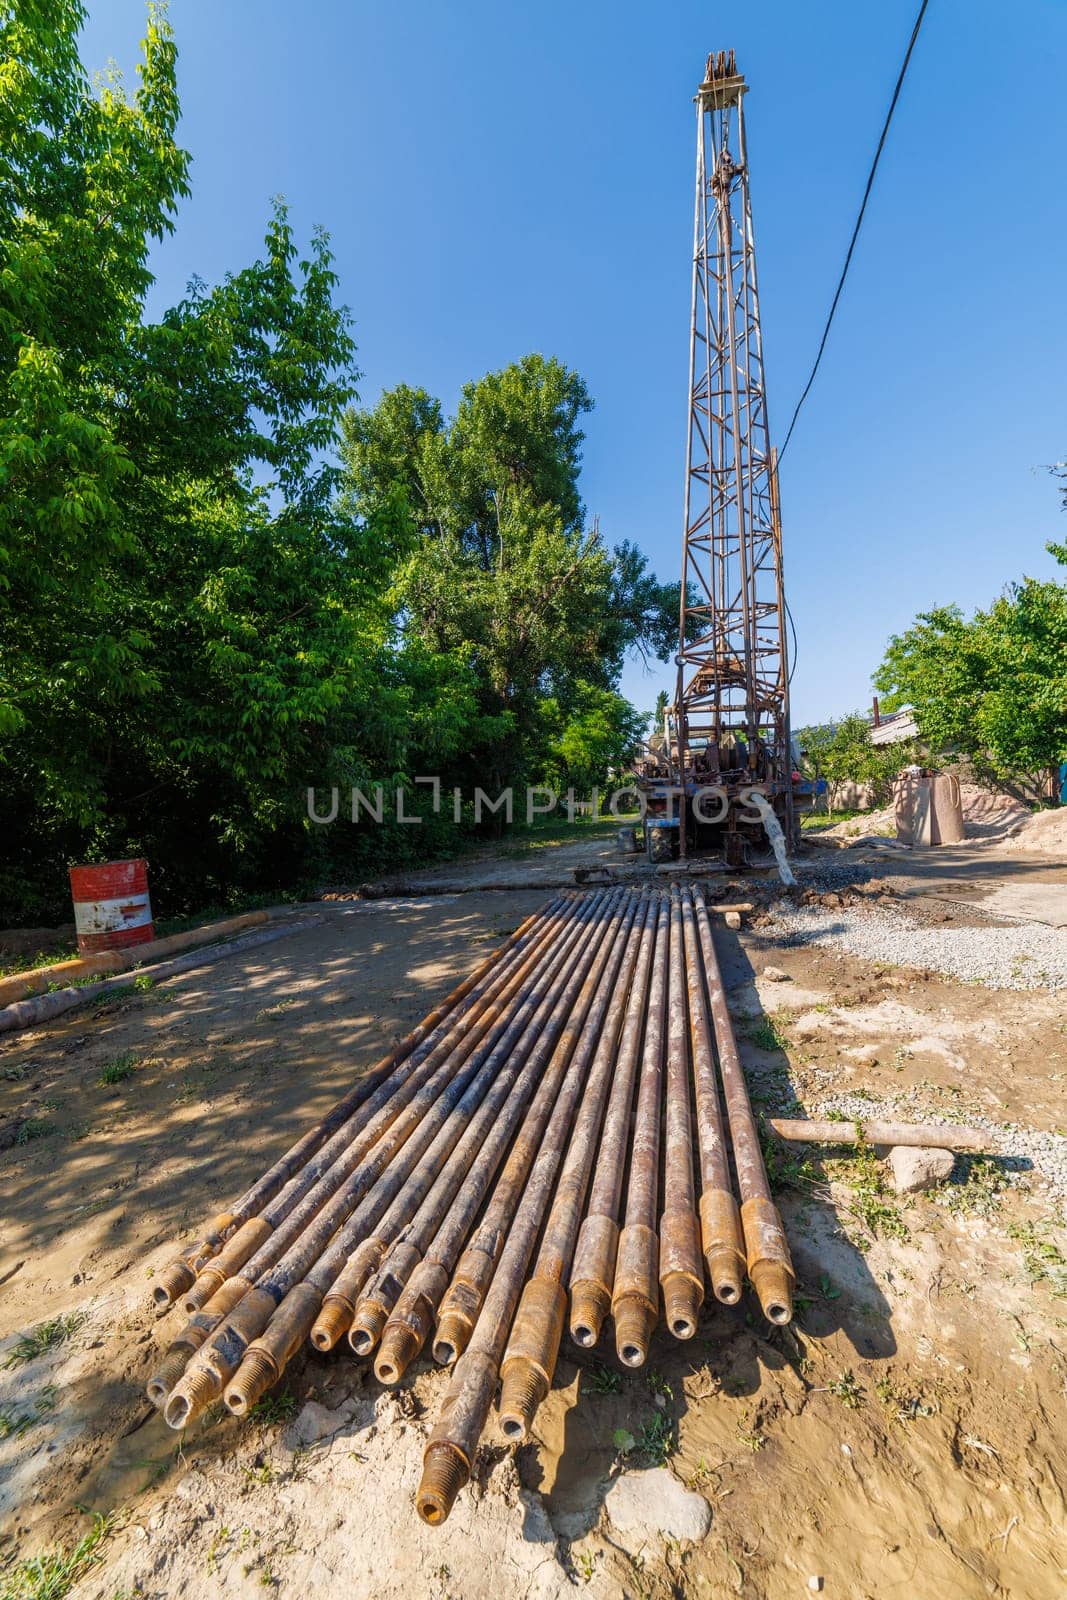 extension drilling rods in front of old water pump truck extracts water from a hole in the ground at sunny summer day, surrounded by a natural landscape with trees, plants, and soil. Ultra-wide angle.